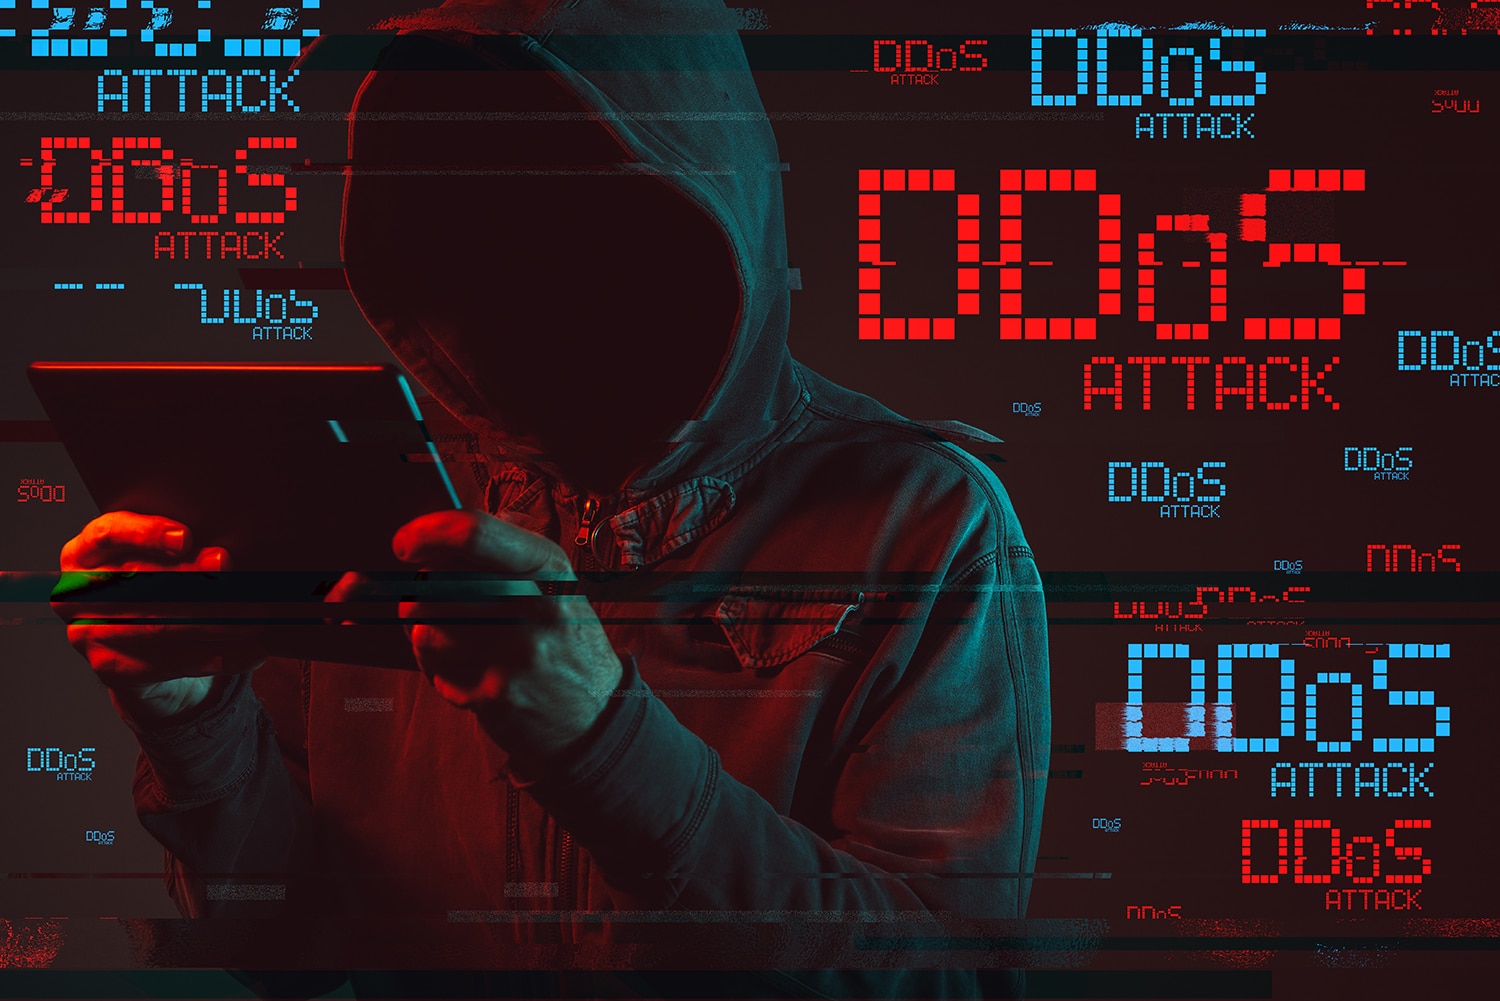 Distributed denial of service or DDoS attack concept with faceless hooded male person using tablet computer, low key red and blue lit image and digital glitch effect